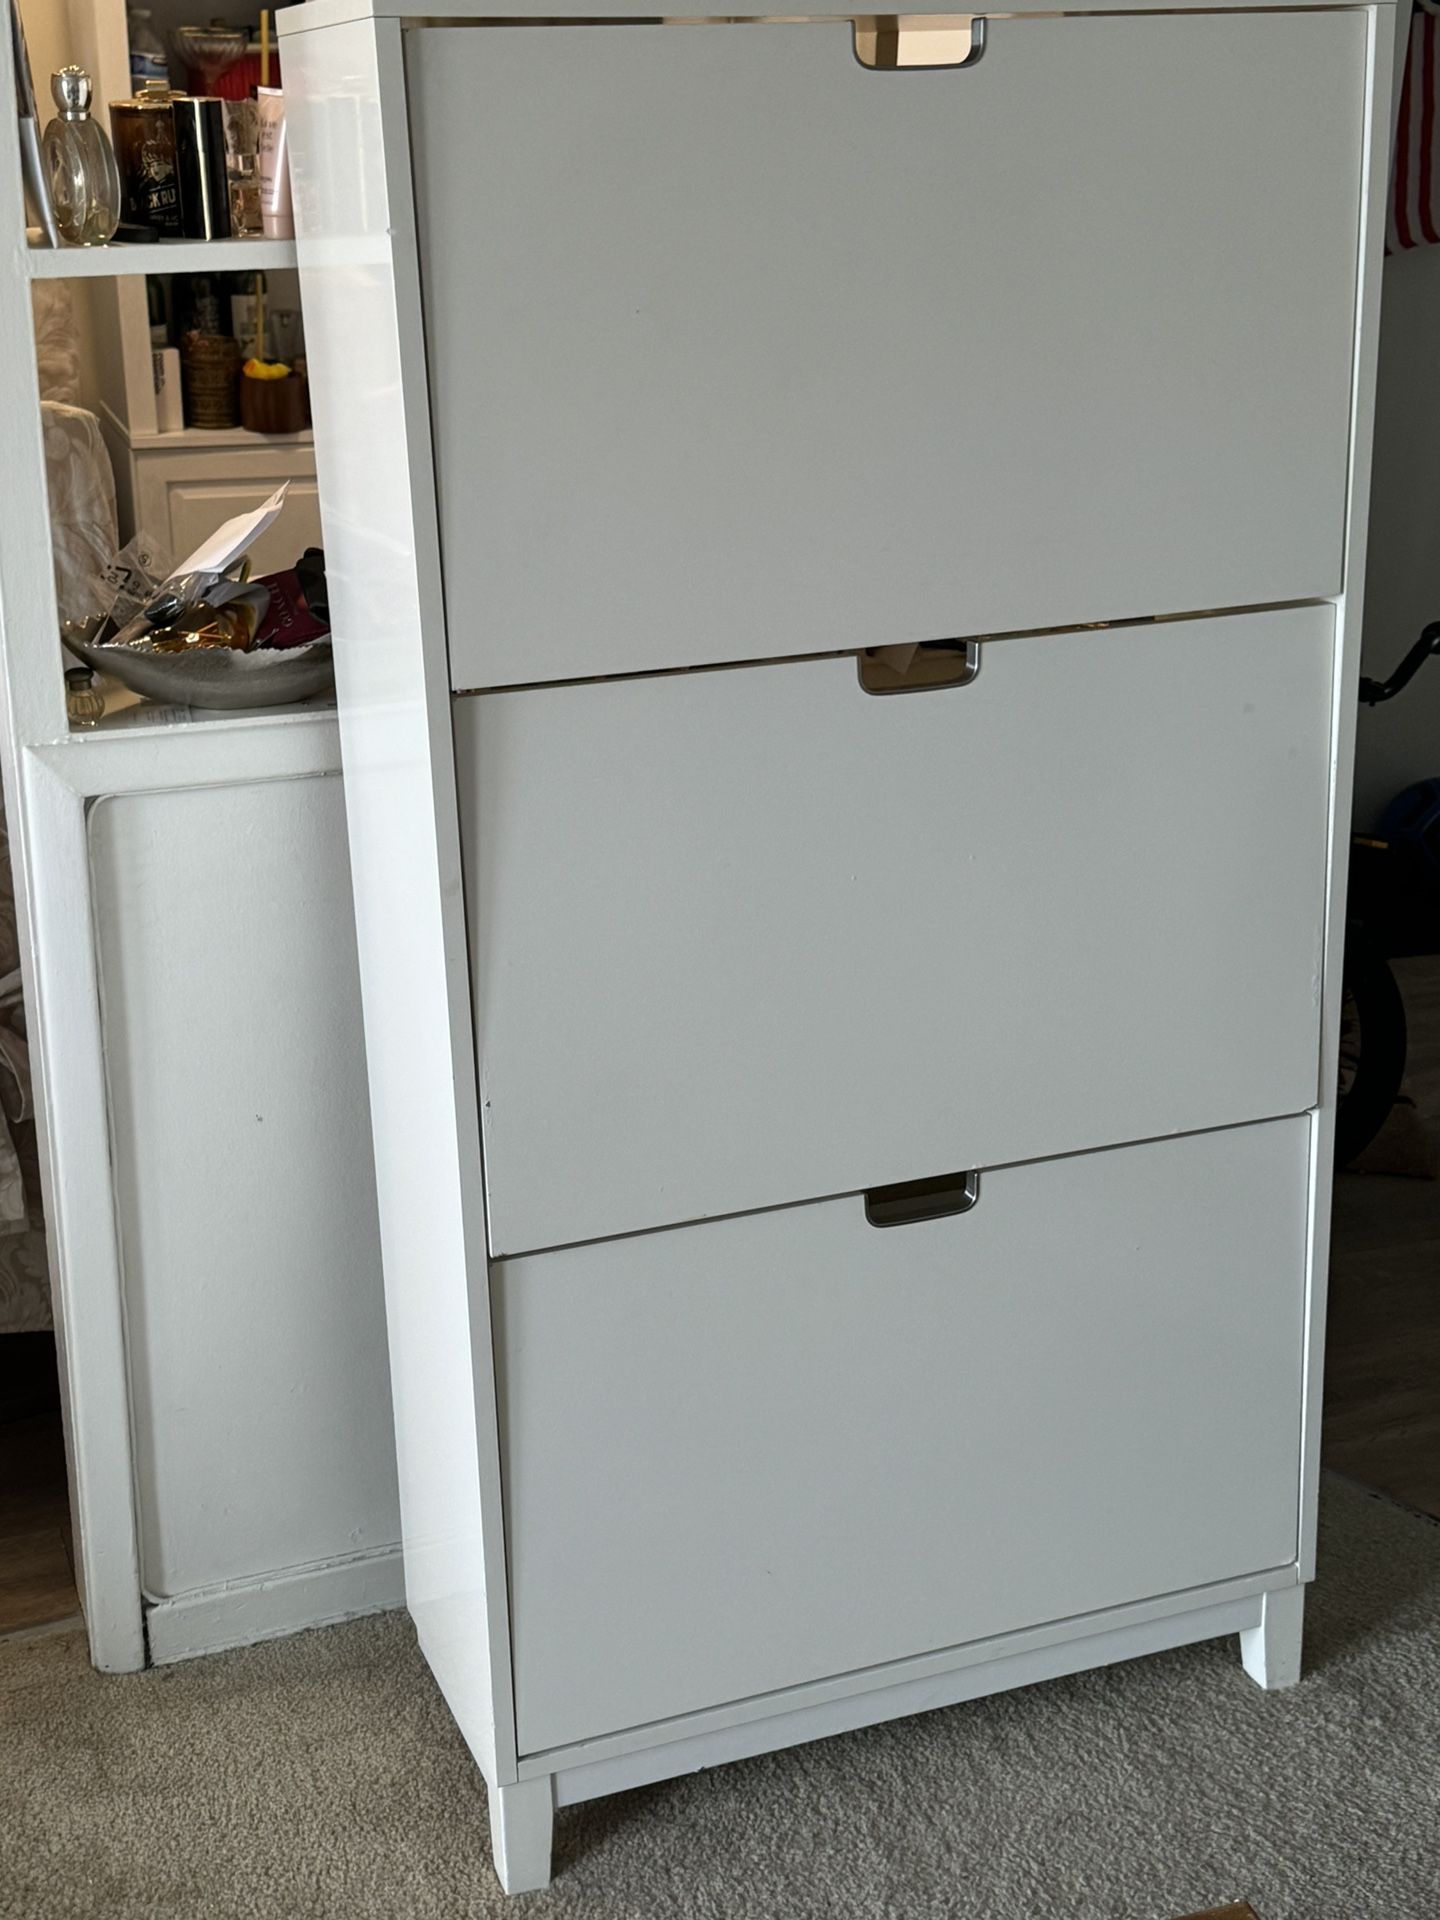 STÄLL Shoe cabinet with 3 compartments, white, 31 1/8x11 3/8x58 1/4 "